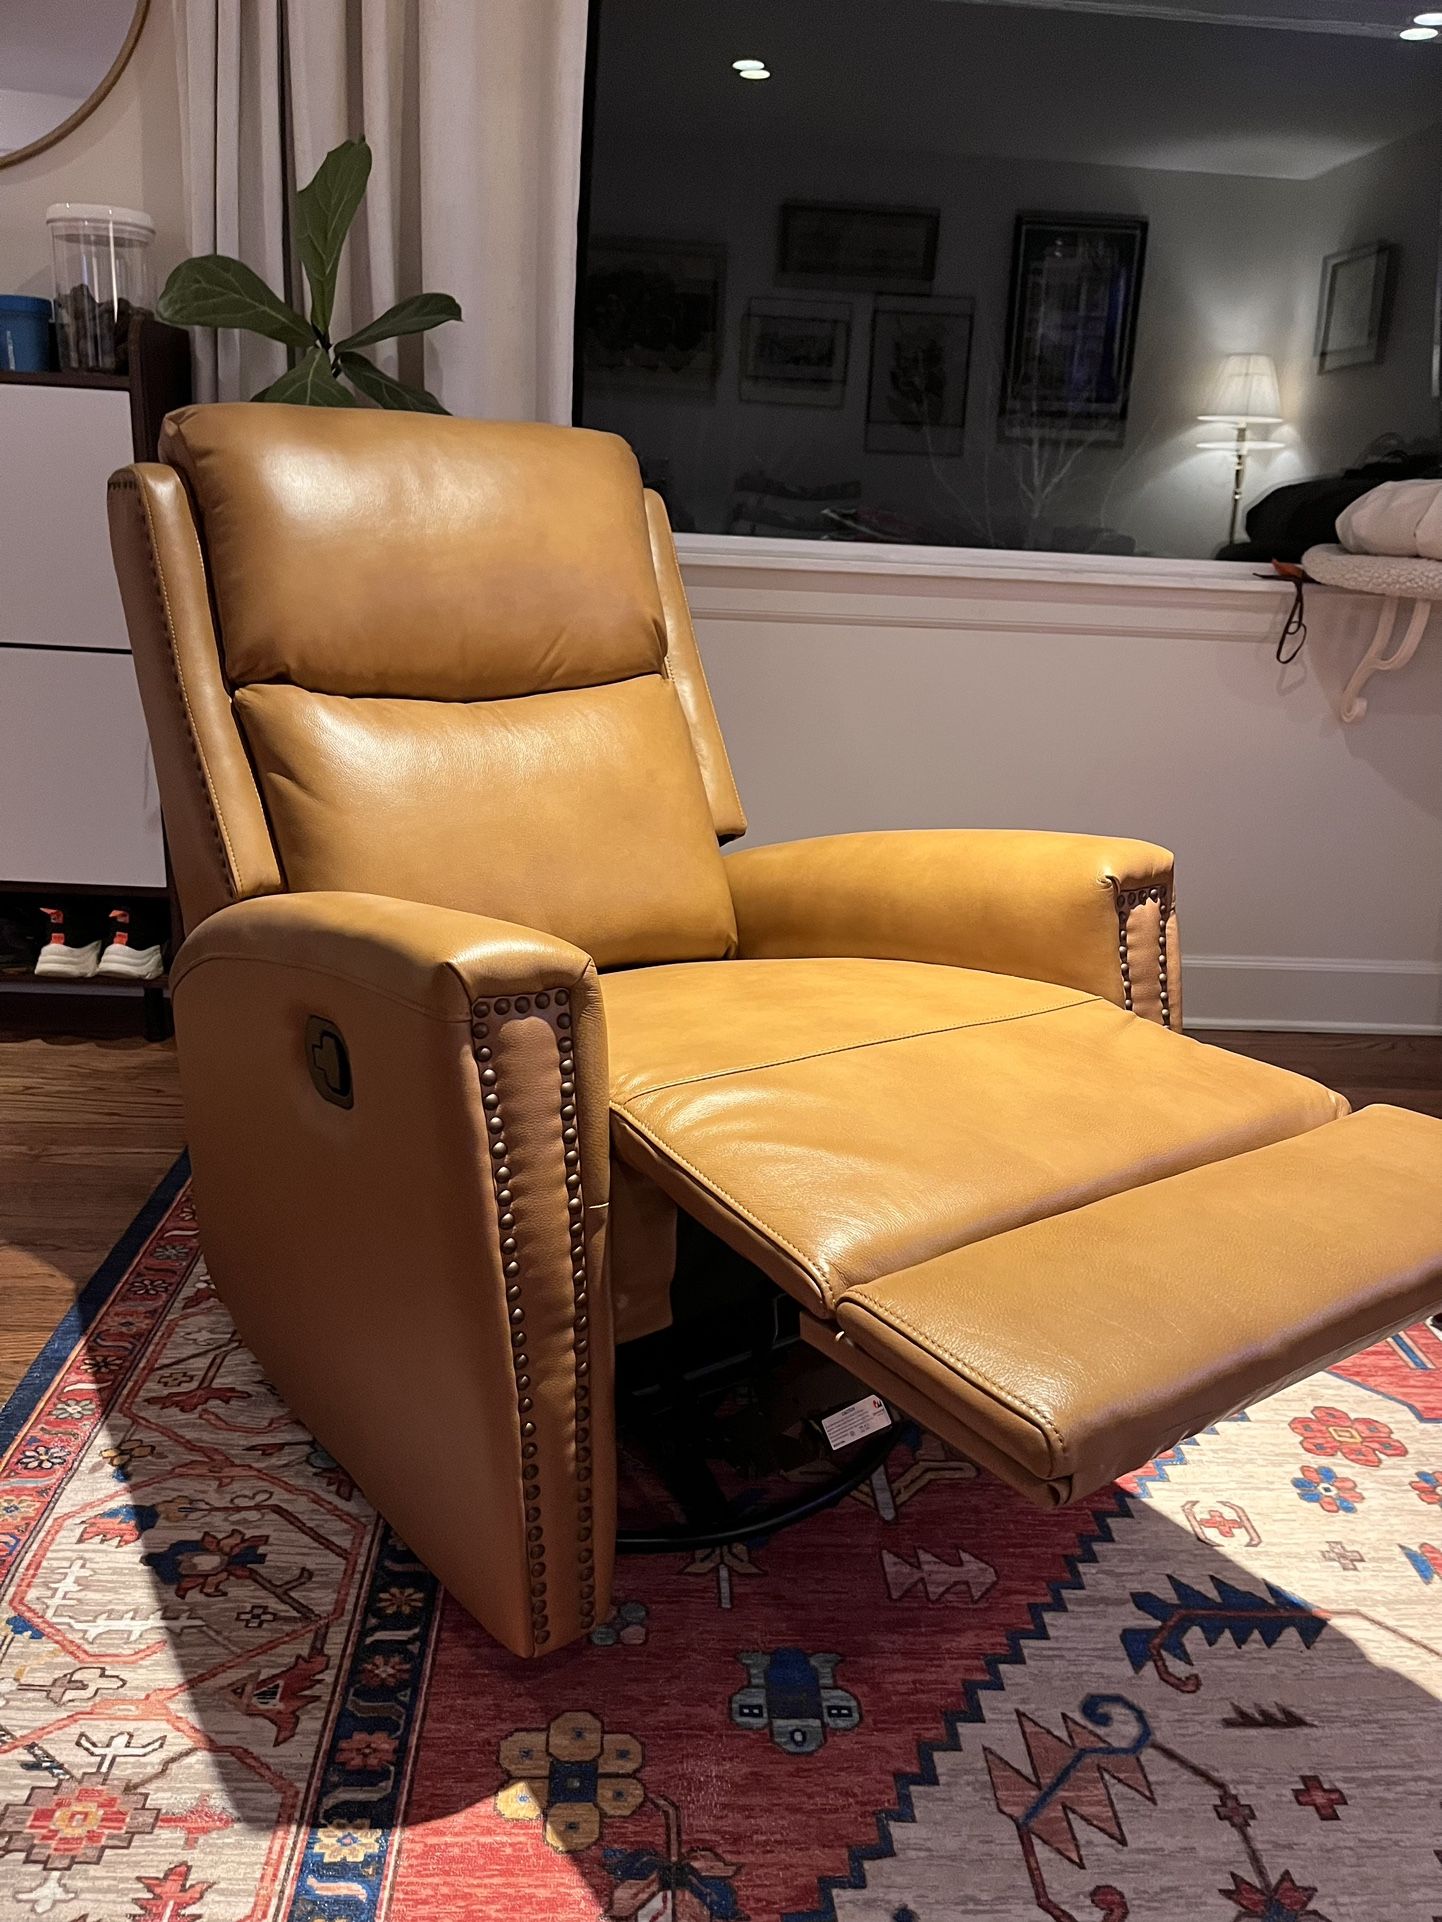 New leather Recliner, Swivel, Glider Chair! 